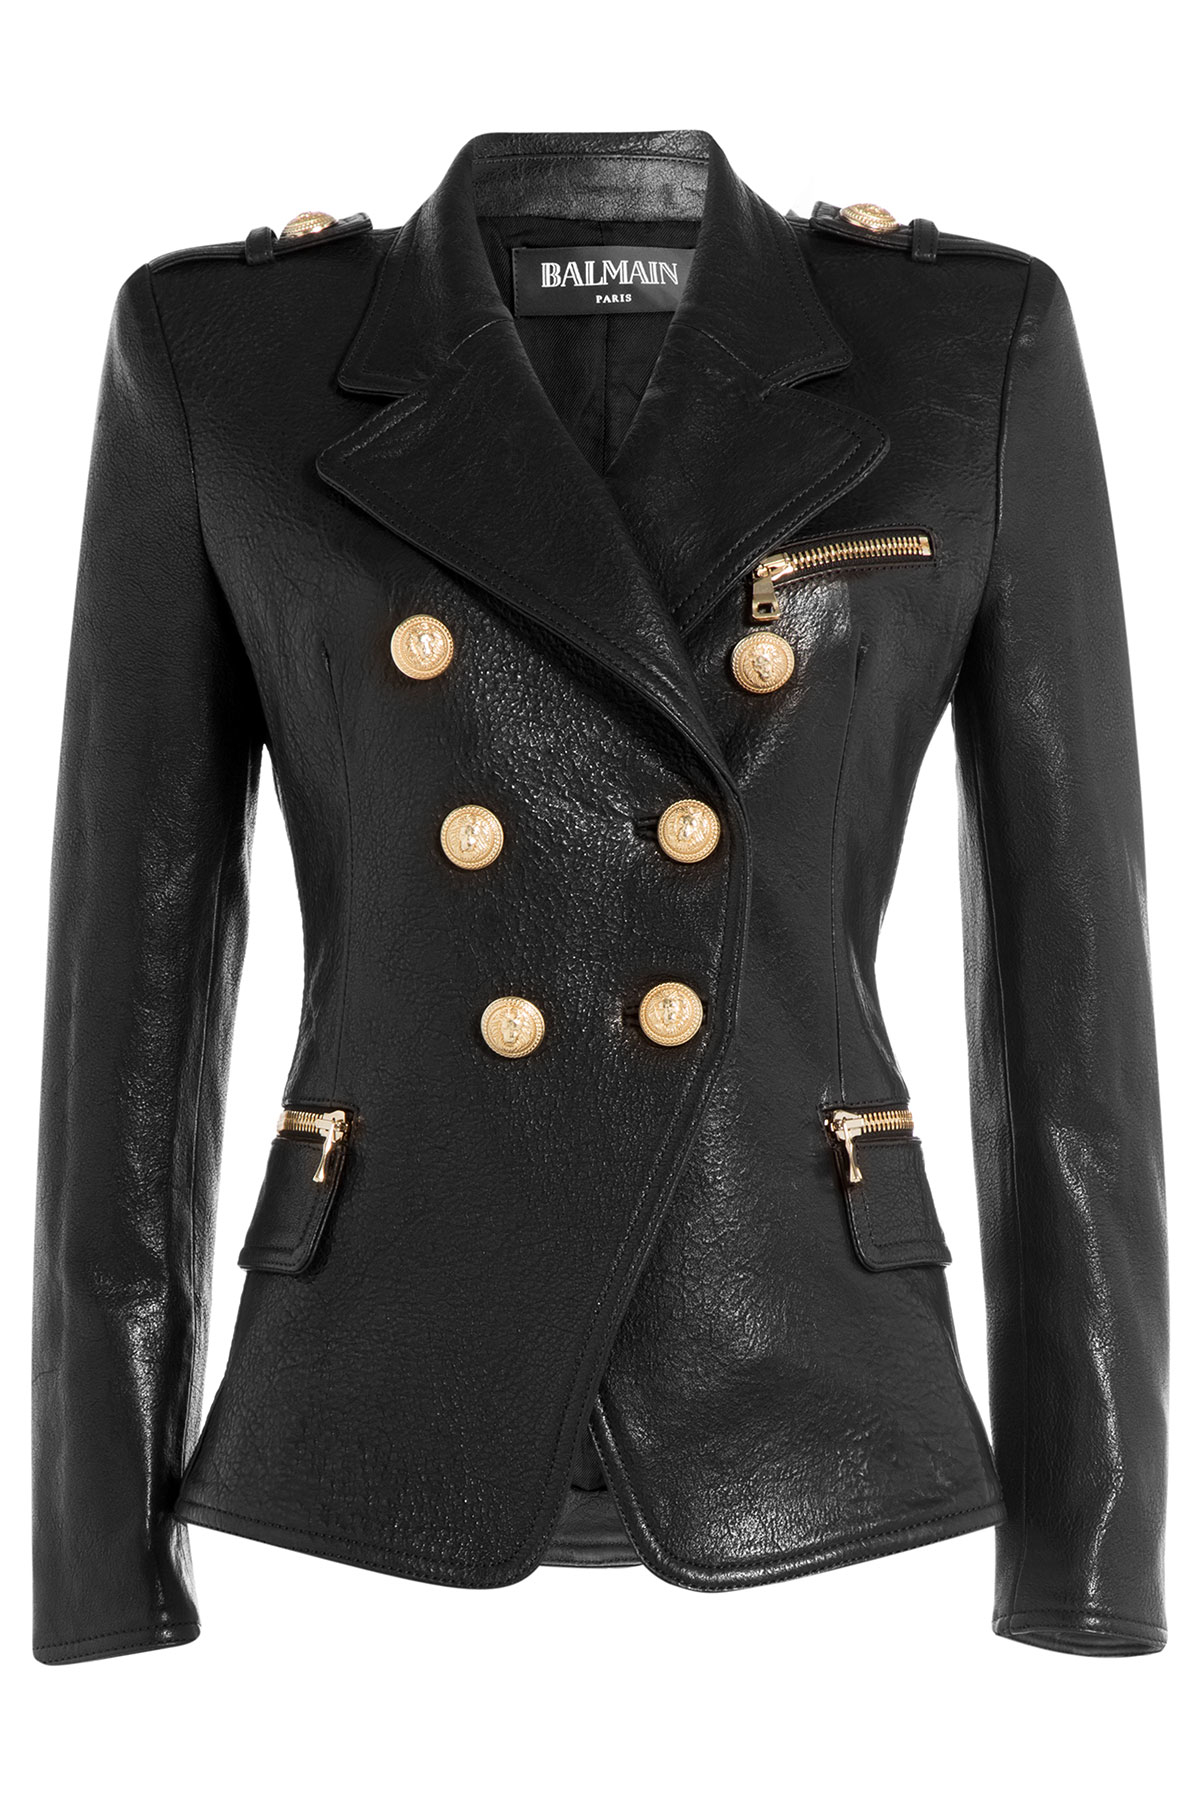 Lyst - Balmain Leather Blazer With Statement Buttons - Black in Black